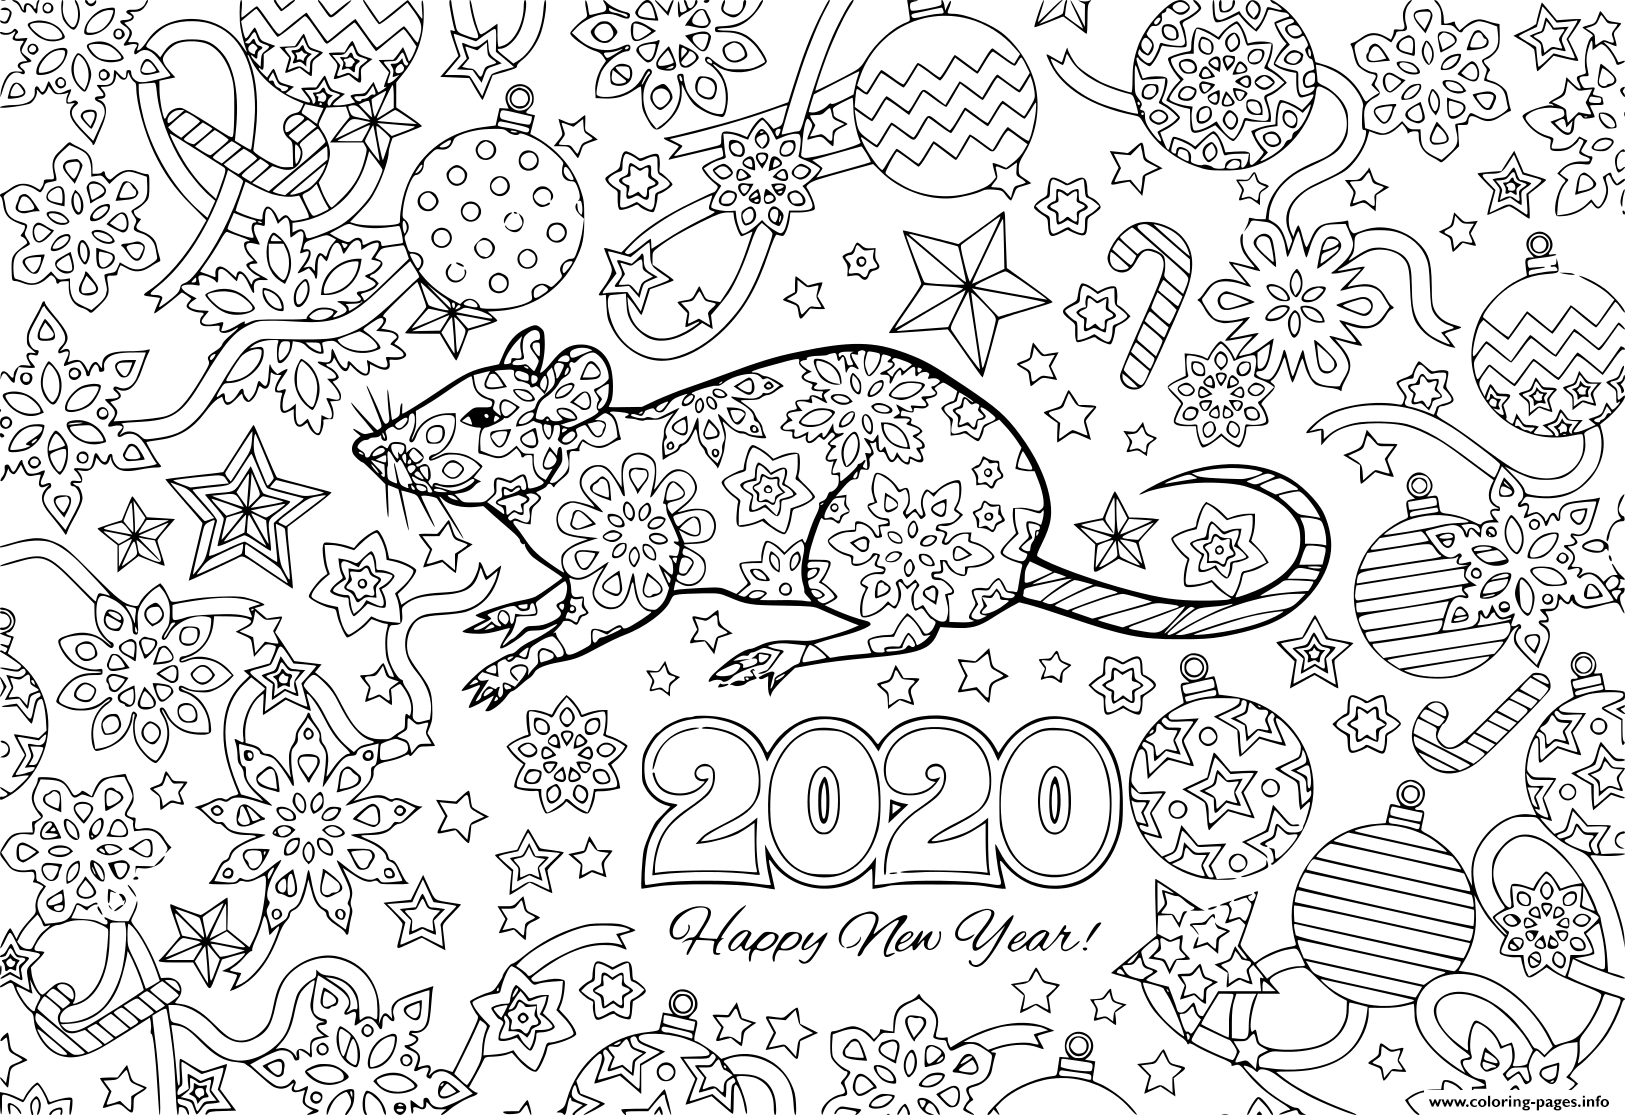 New Year 2020 Rat And Festive Objects Image For Calendar